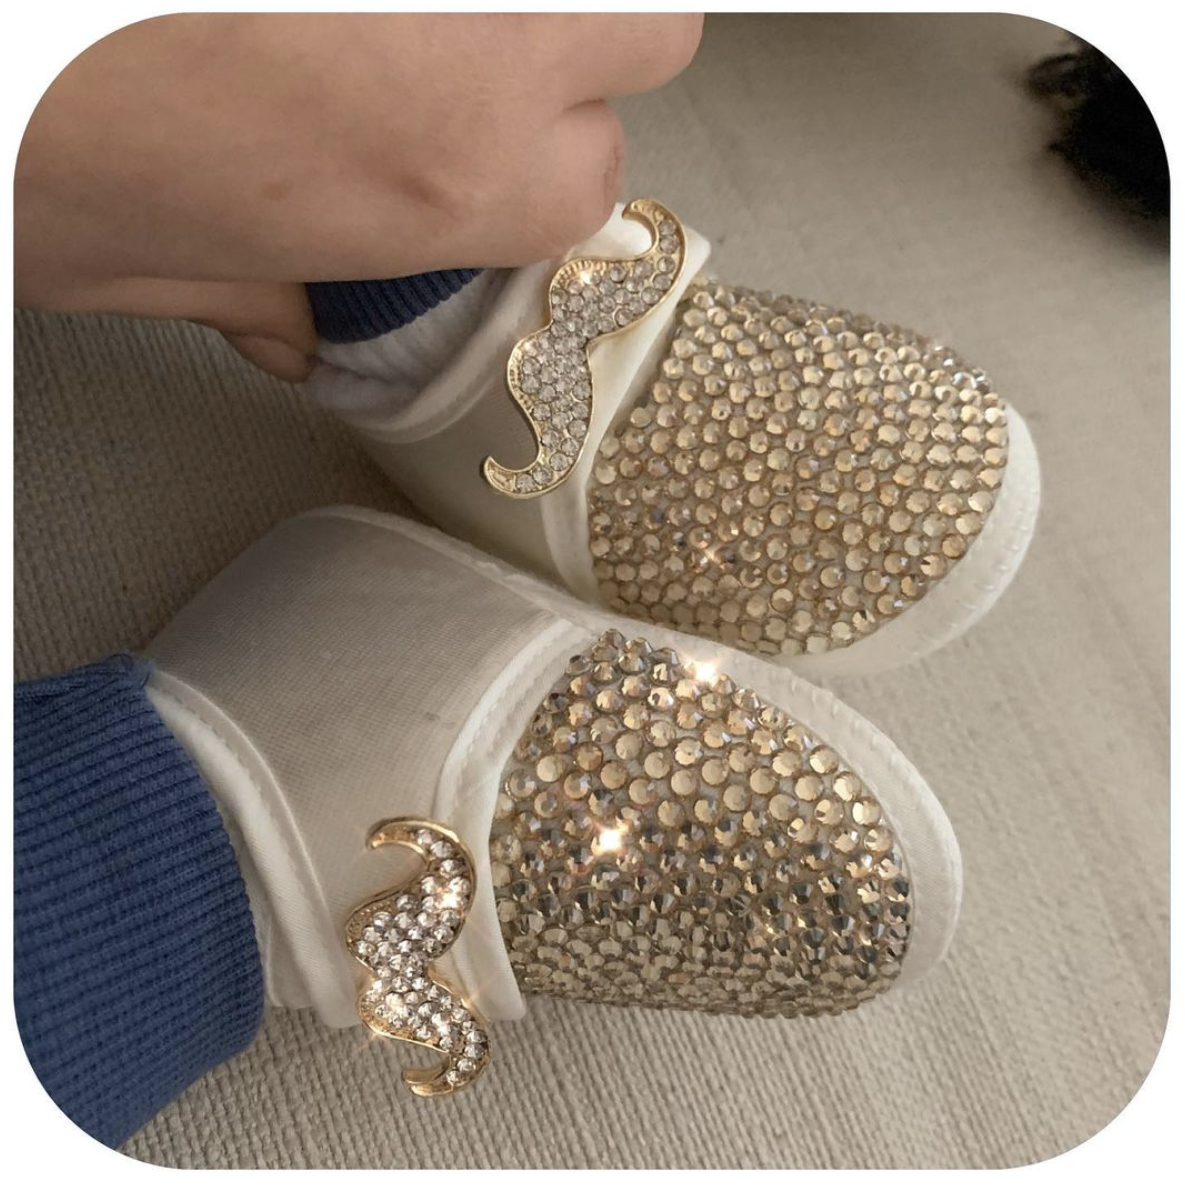 Crystals Mustache Baby Boy Shoes and Bow Tie